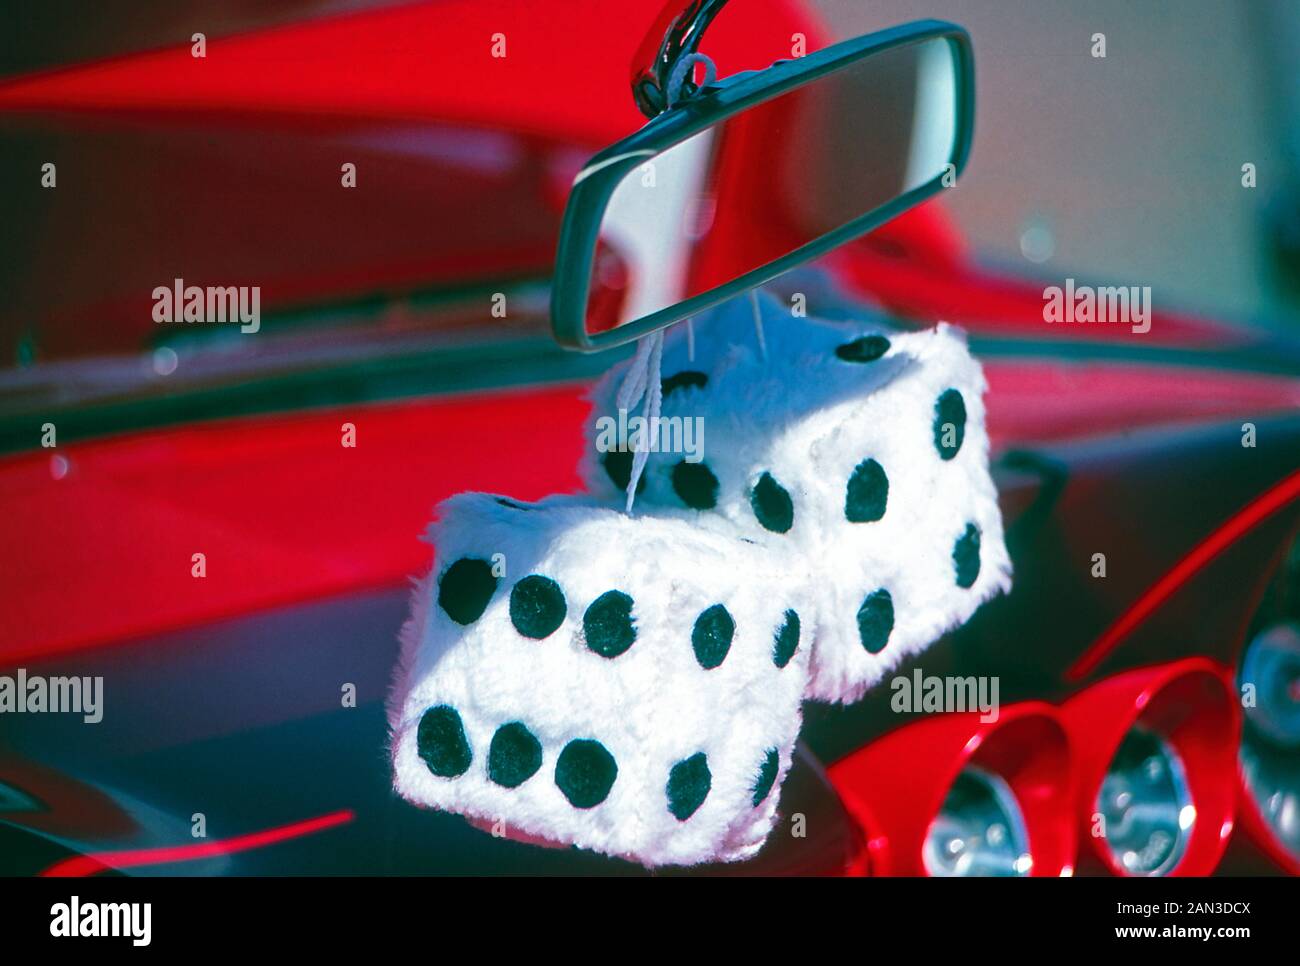 Fuzzy dice hanging from the rear view mirror of a vintage car Stock Photo